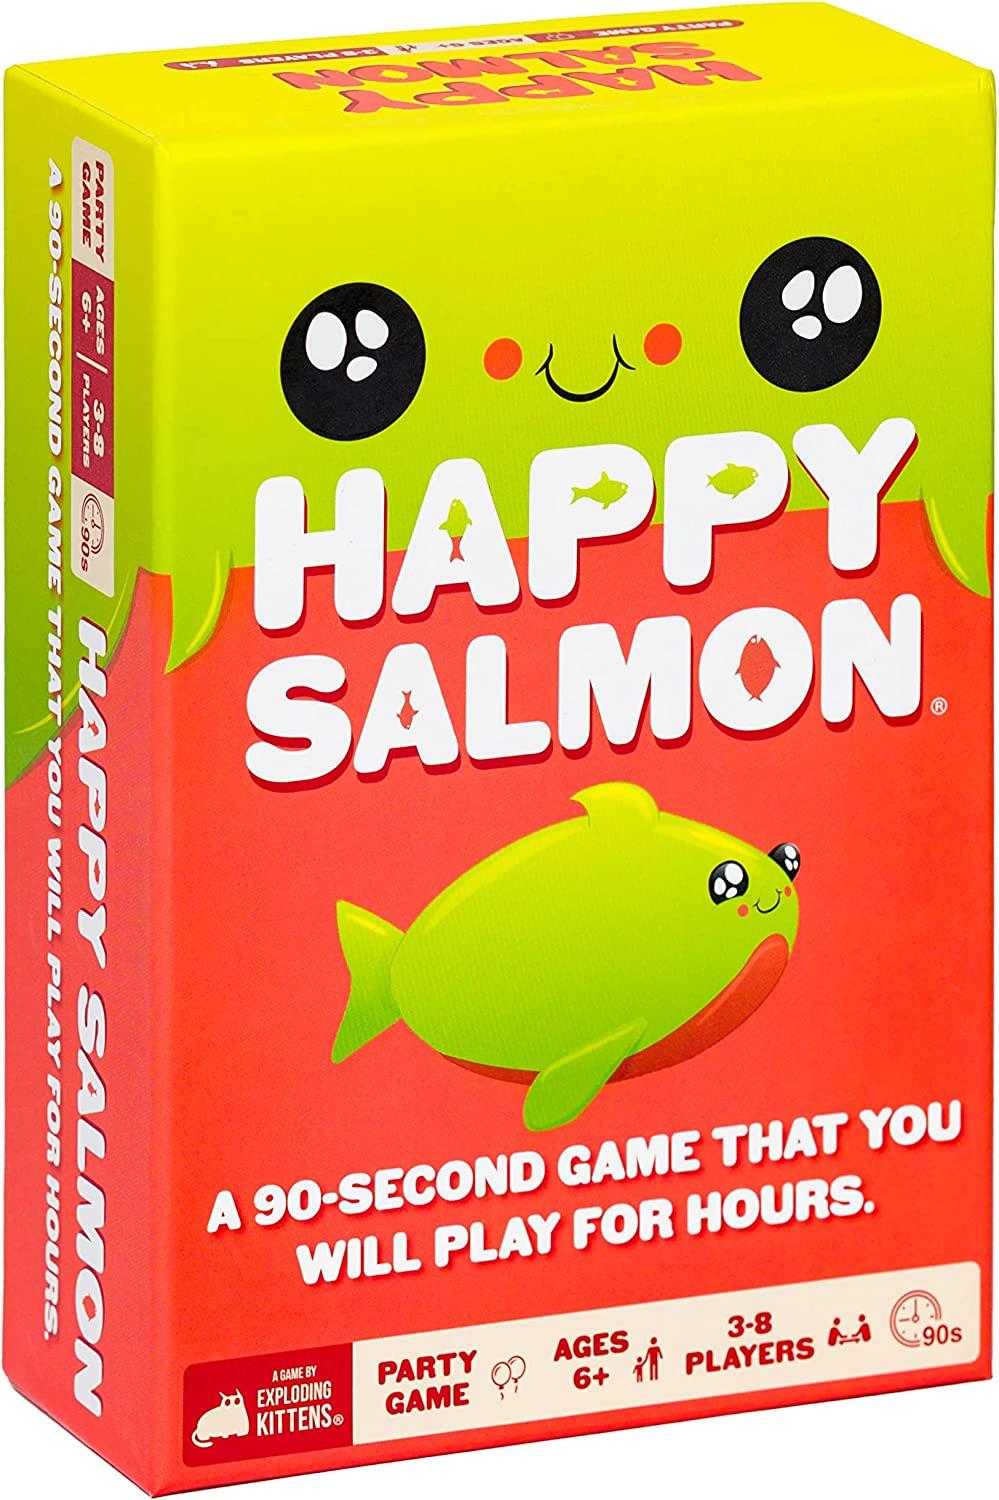 Happy salmon is the fast-paced card game that gets everyone moving and laughing in under two minutes.